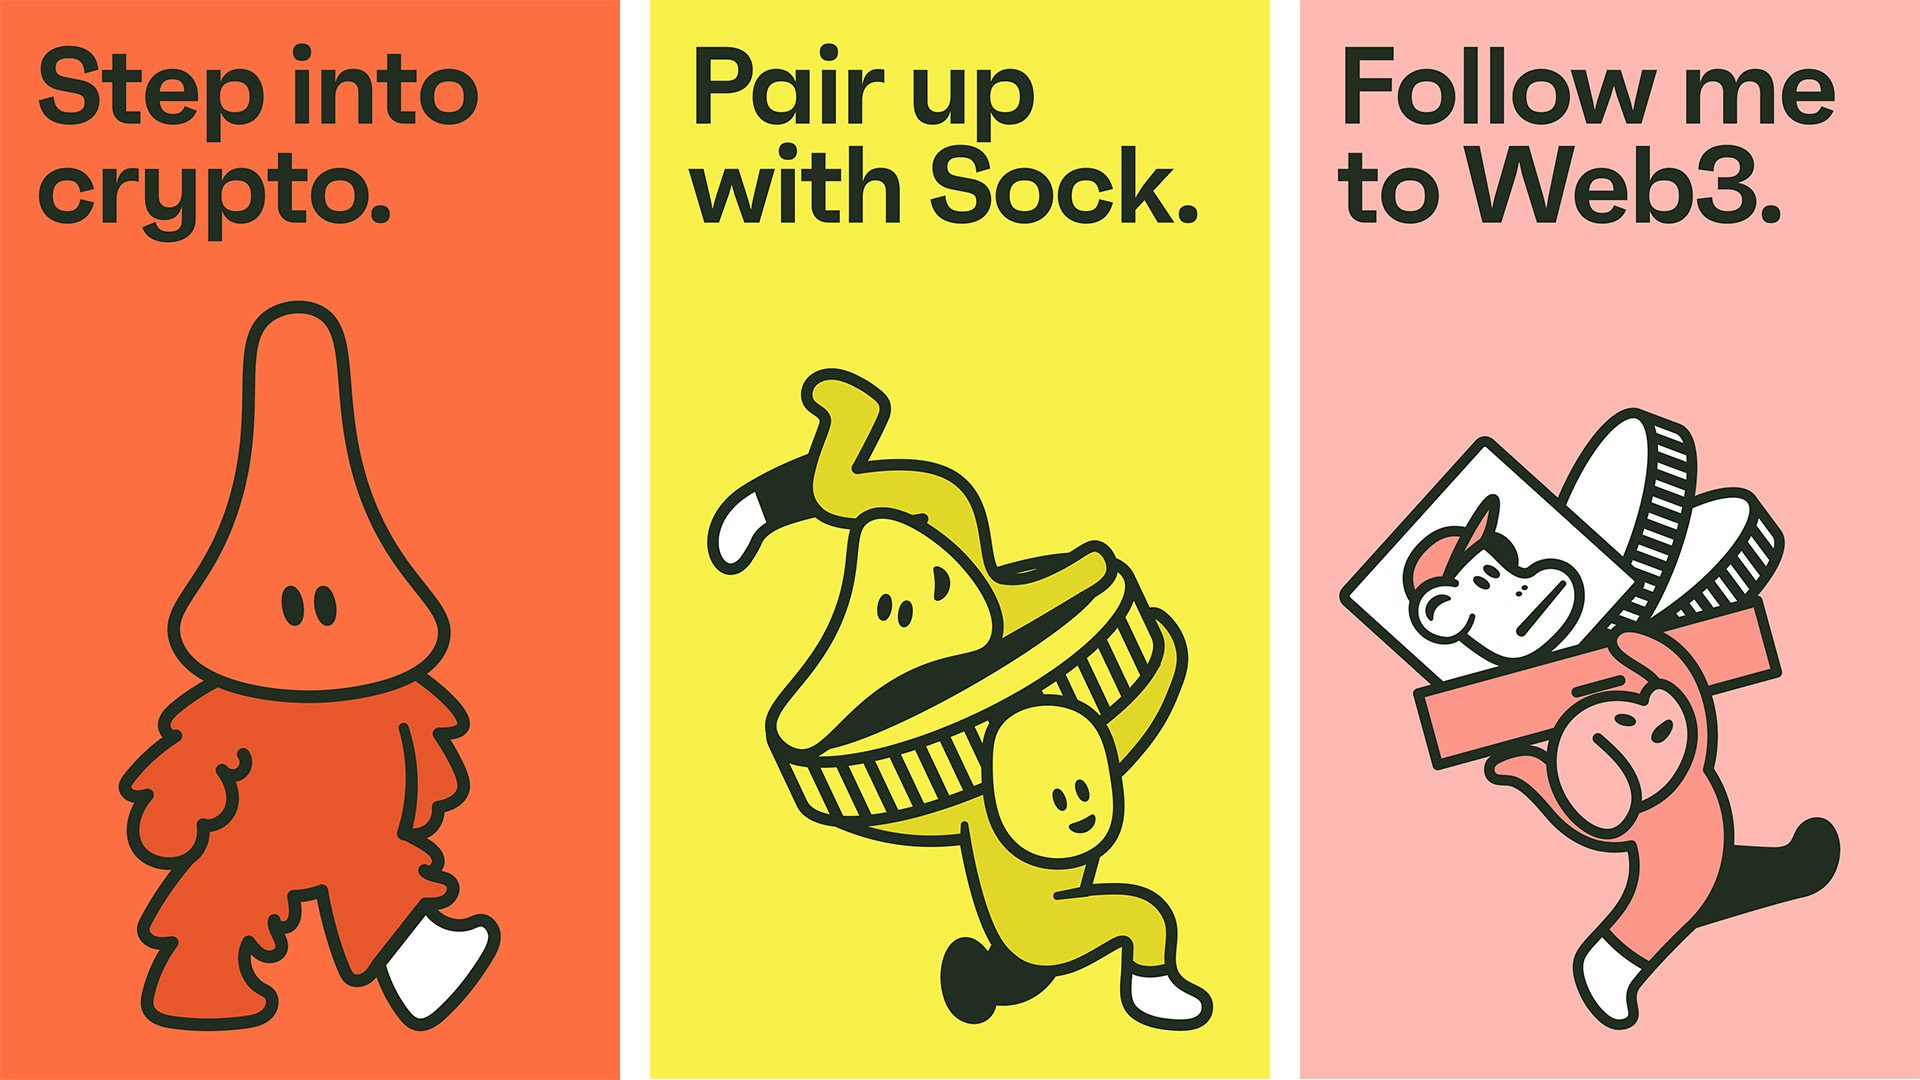 Composite image of Sock's branding showing three cartoon characters each against an orange, yellow, and pink background, headlined 'step into crypto', 'pair up with Sock', and 'follow me to Web 3' respectively